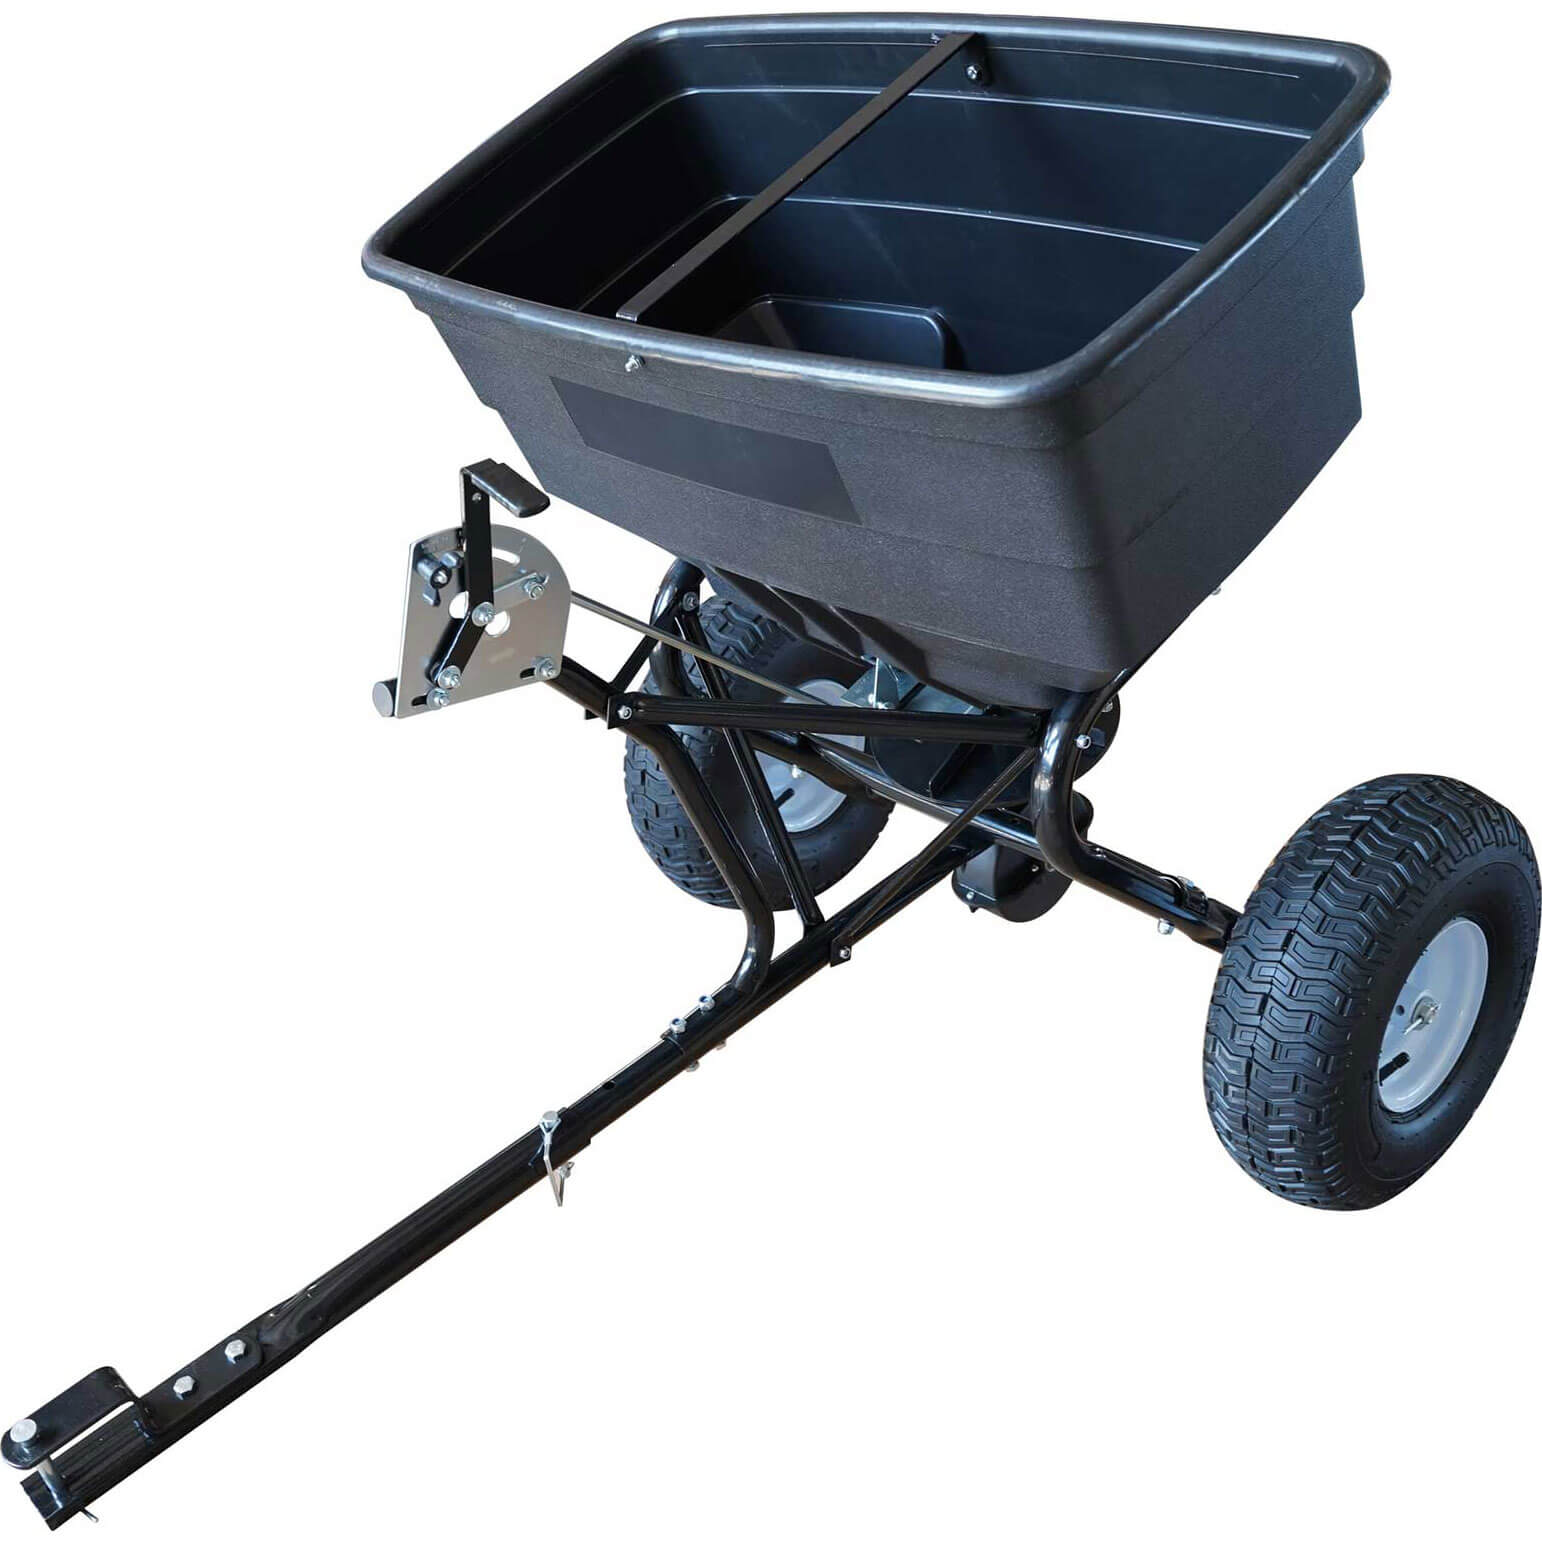 Image of Handy THTS175 Towable Feed and Grass Broadcast Spreader 79kg